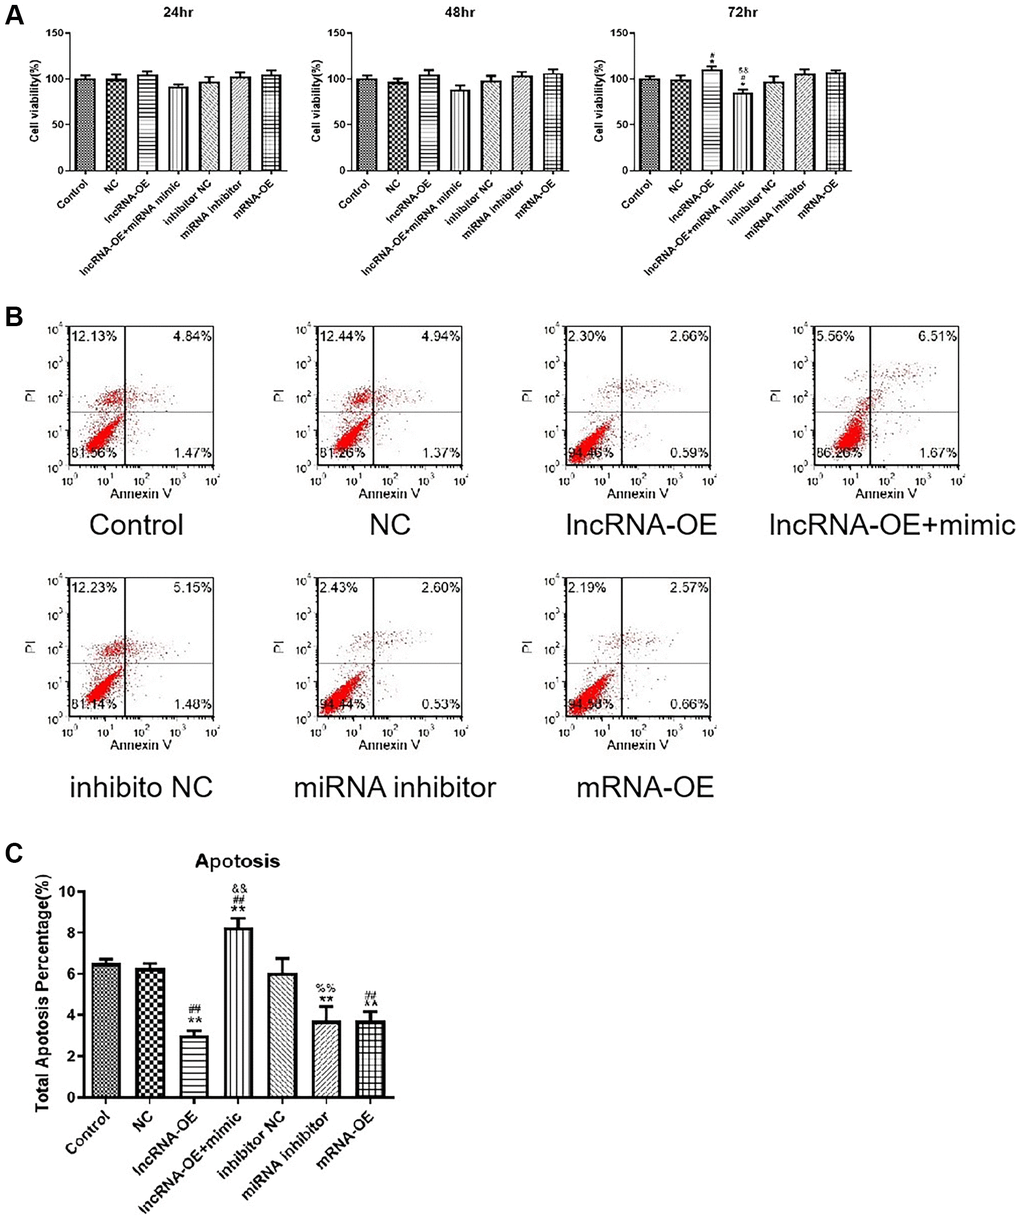 LncRNA GPRC5D-AS1 regulated cell viability and cell apoptosis by miR-520d-5p. (A) Cell viability was assessed by CCK-8 assay. 15 mM Dex was added in HSMM to establish atrophy cell model (control group). Empty plasmid (NC group), GPRC5D-AS1-OE (lncRNA-OE group), GPRC5D-AS1-OE + miR-520d-5p mimic (lncRNA-OE + mimic group), miRNA inhibitor control (inhibitor NC group), miR-520d-5p inhibitor (miRNA inhibitor group) or MYOD1-OE plasmid (mRNA-OE group) was transfected into atrophy cell model and incubated for 24 h, 48 h and 72 h. *P #P &P &&P B) Cell apoptosis was assessed by flow cytometry. Groups were set as previously mentioned. Six different plasmids were transfected into atrophy cell model and incubated for 48 h. (C) Quantitative analysis of cell apoptosis. *P **P #P ##P &P &&P %P %%P 